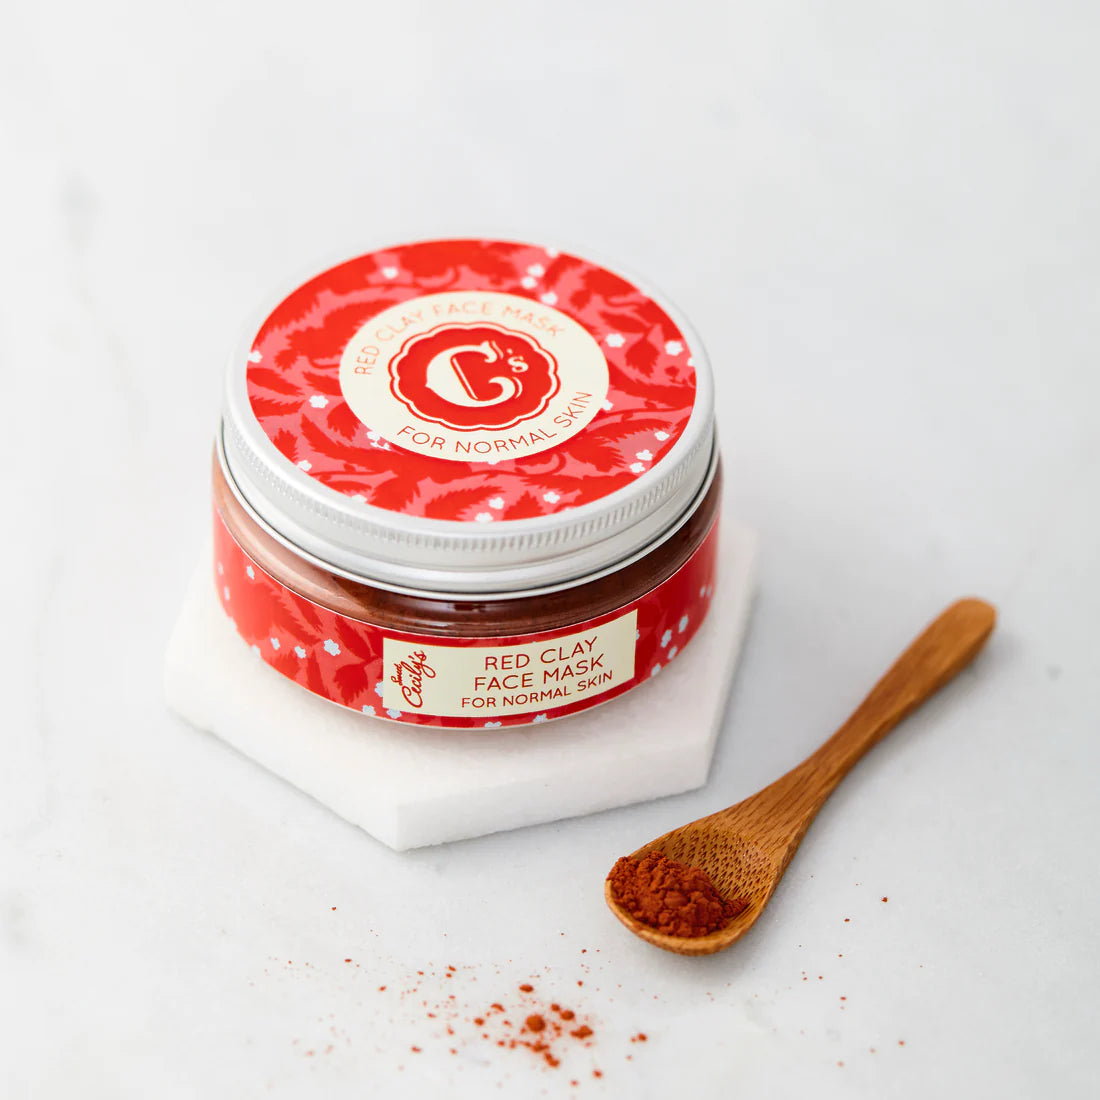 Sweet Cecily's Red Clay Face Mask